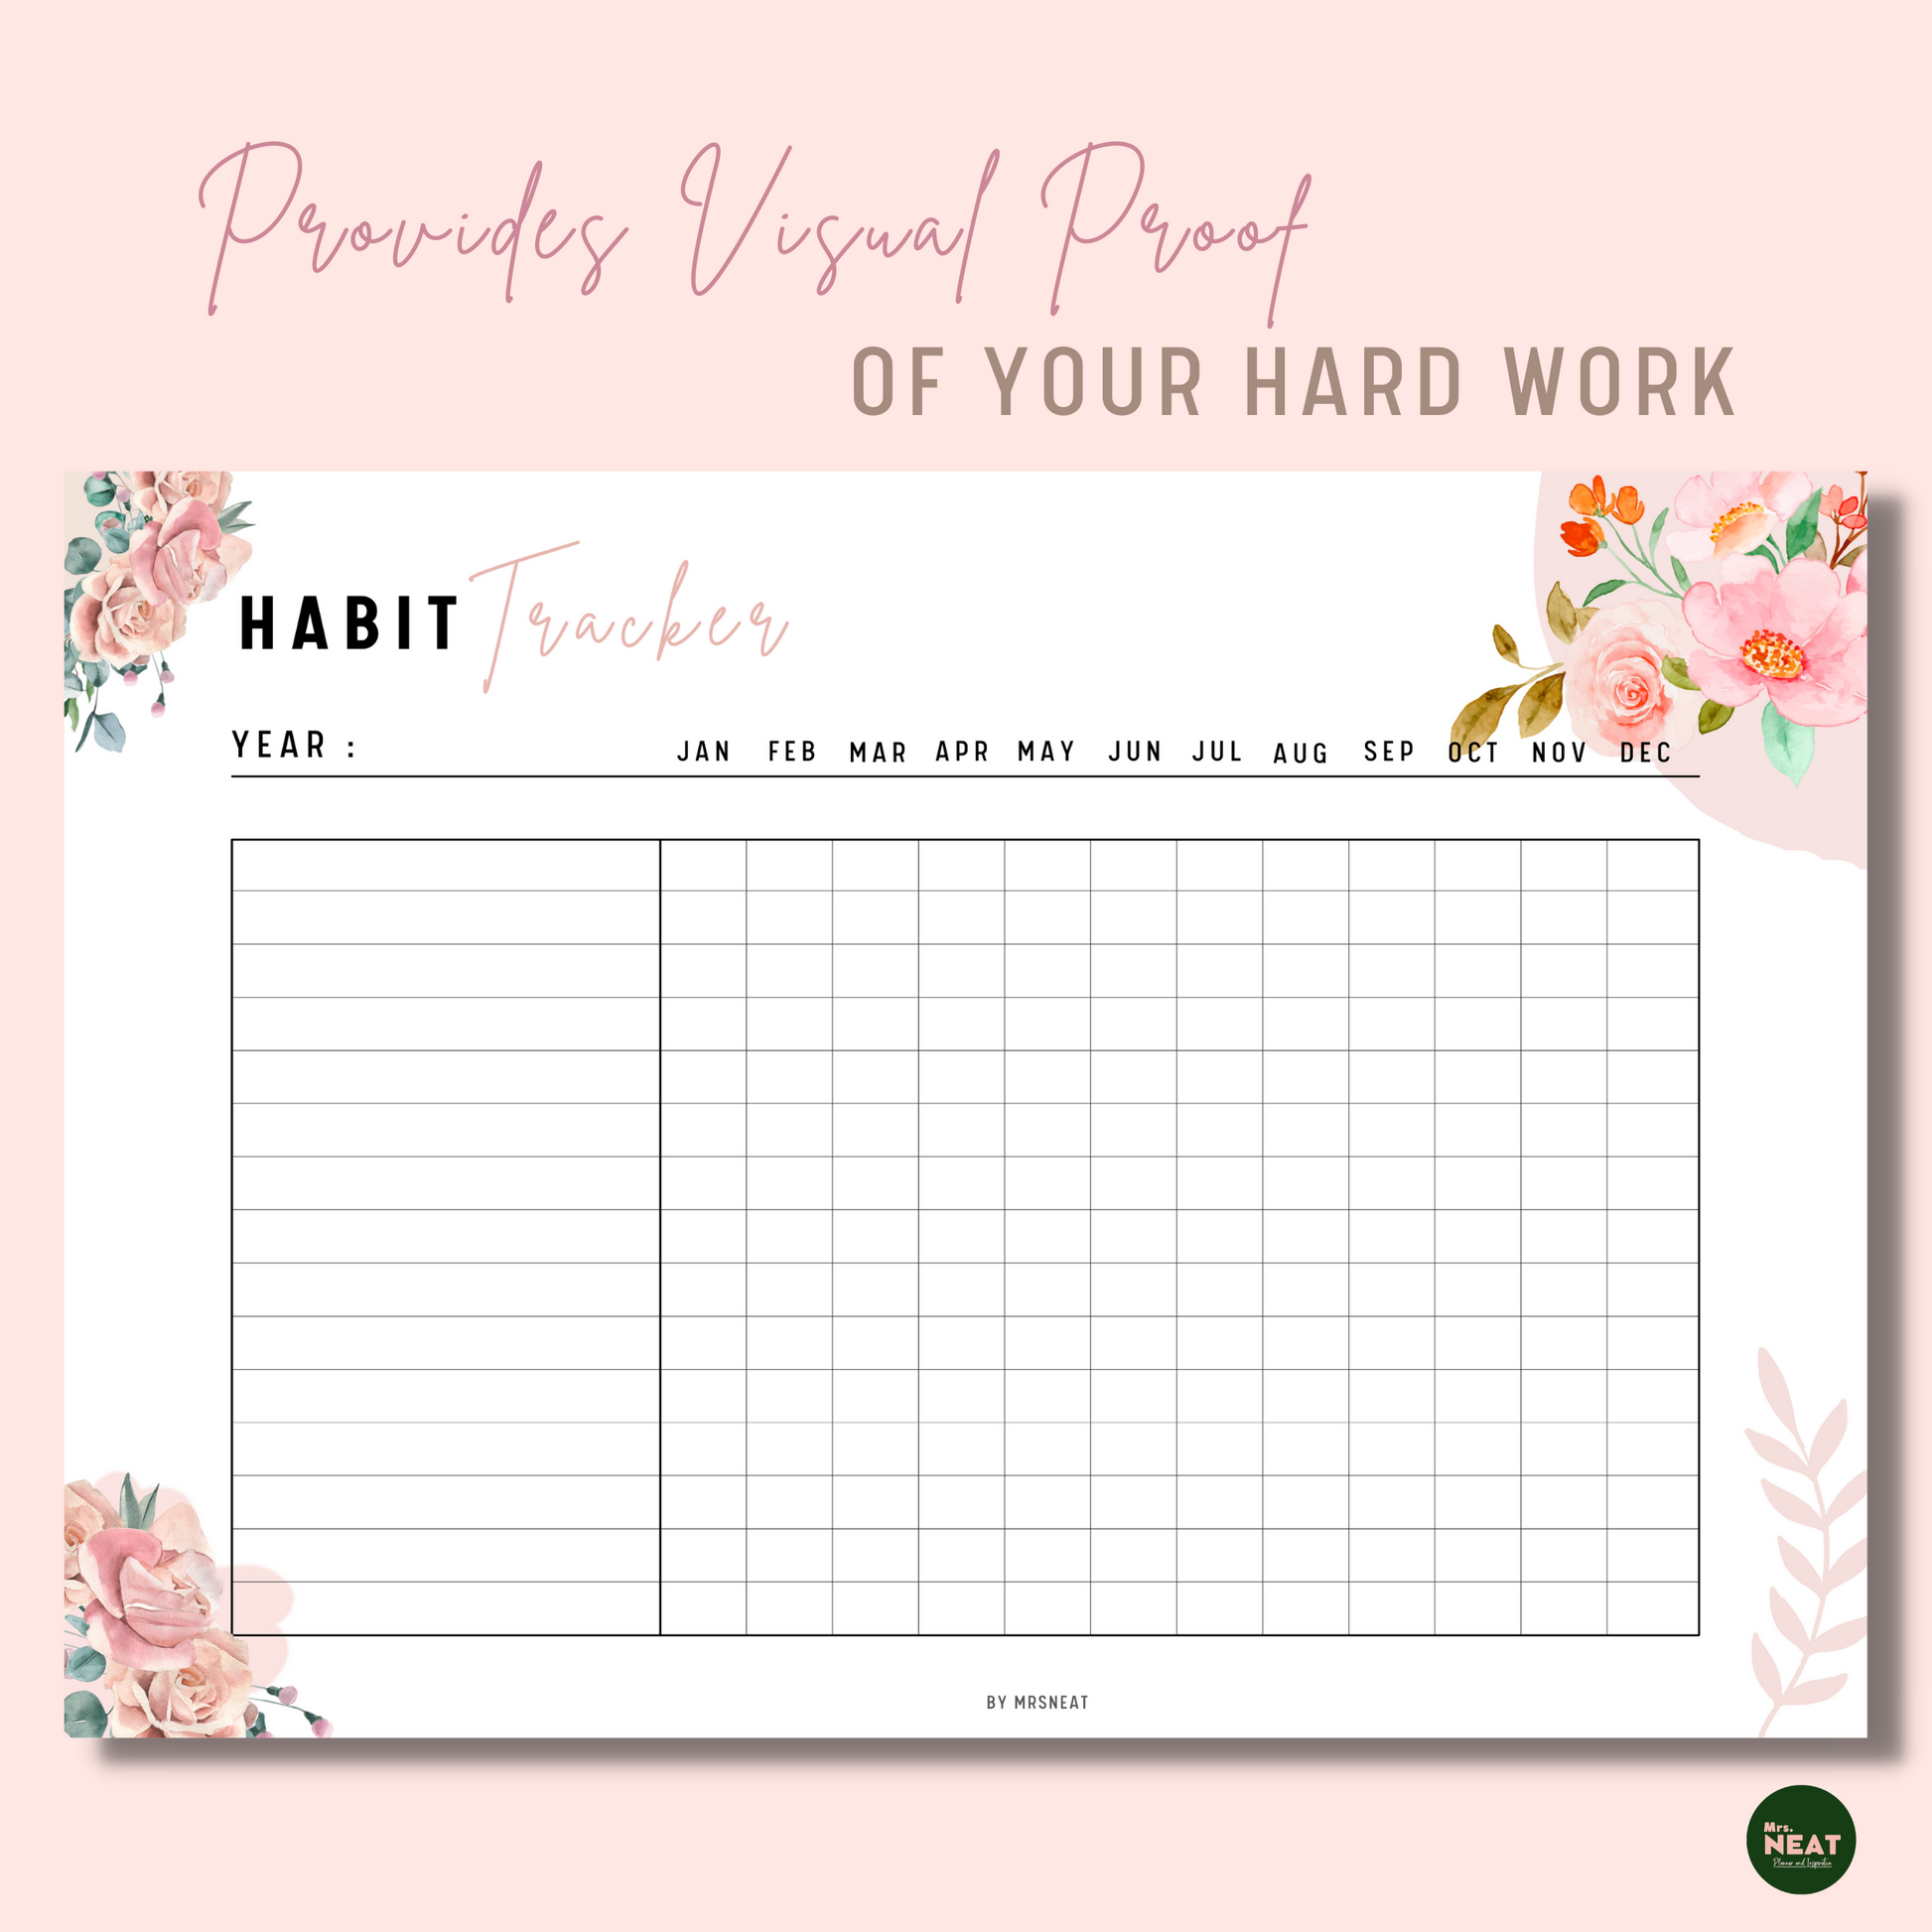 February monthly planner, weekly planner, habit tracker template